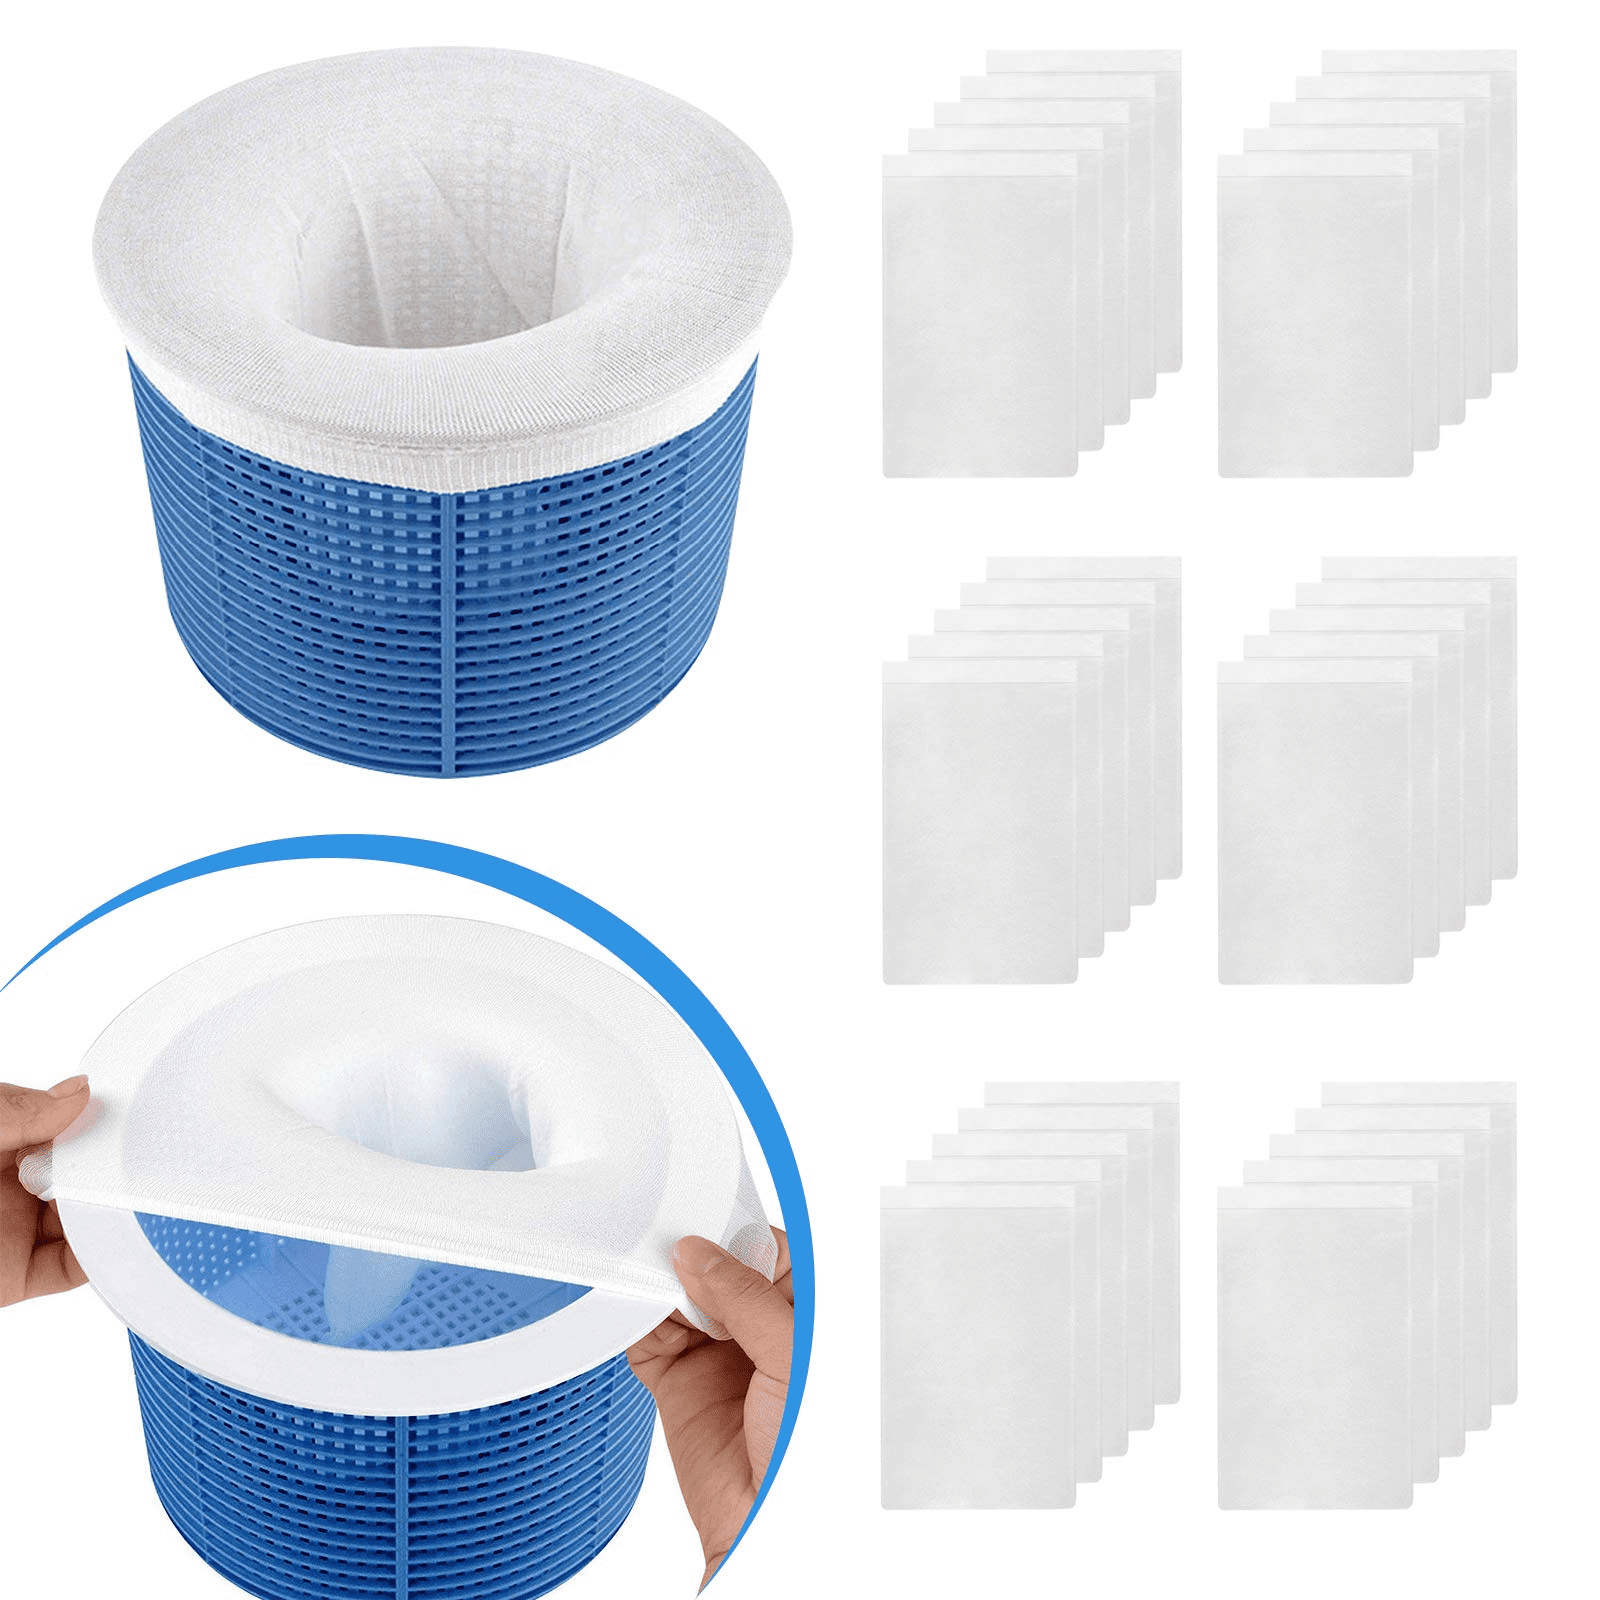 Skimmers Cleans Debris and Leaves for In-Ground and Above Ground Pools XtremepowerUS 30-Pack of Pool Skimmer Socks,tra Fine Mesh Filter Sock Net for Skimmer Baskets 